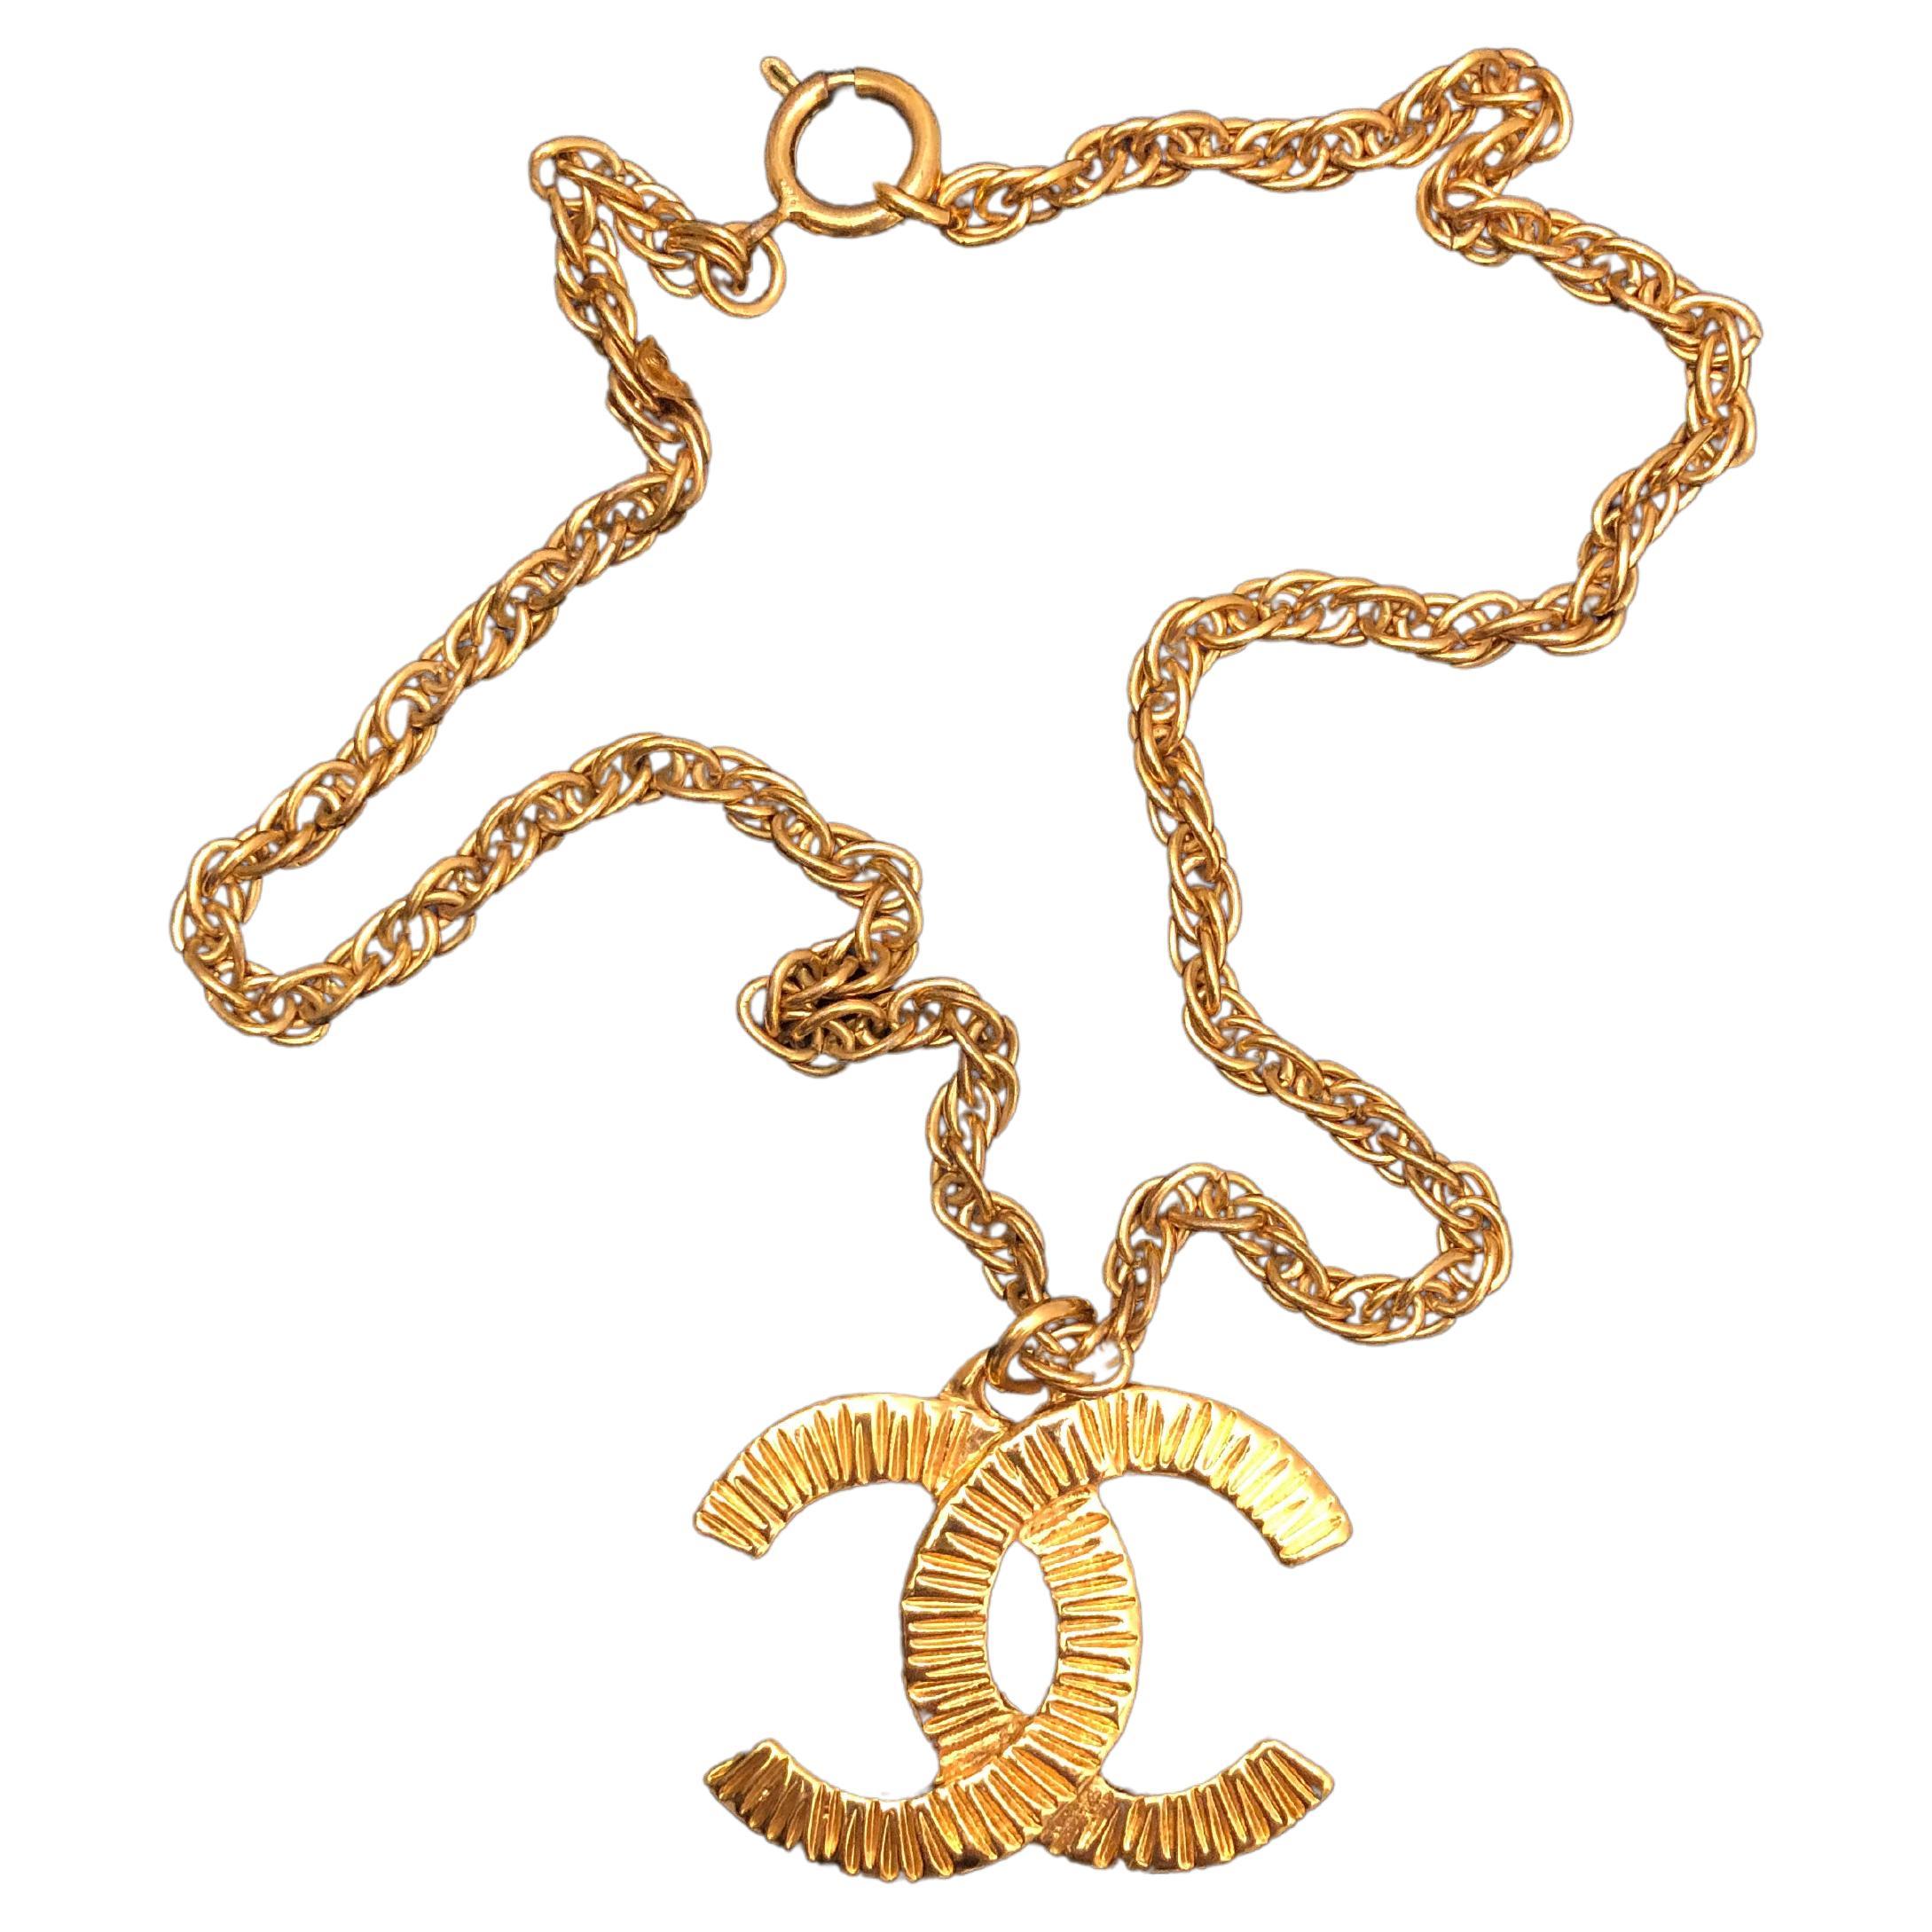 1993 Vintage CHANEL Gold Toned CC Charm Short Chain Necklace For Sale